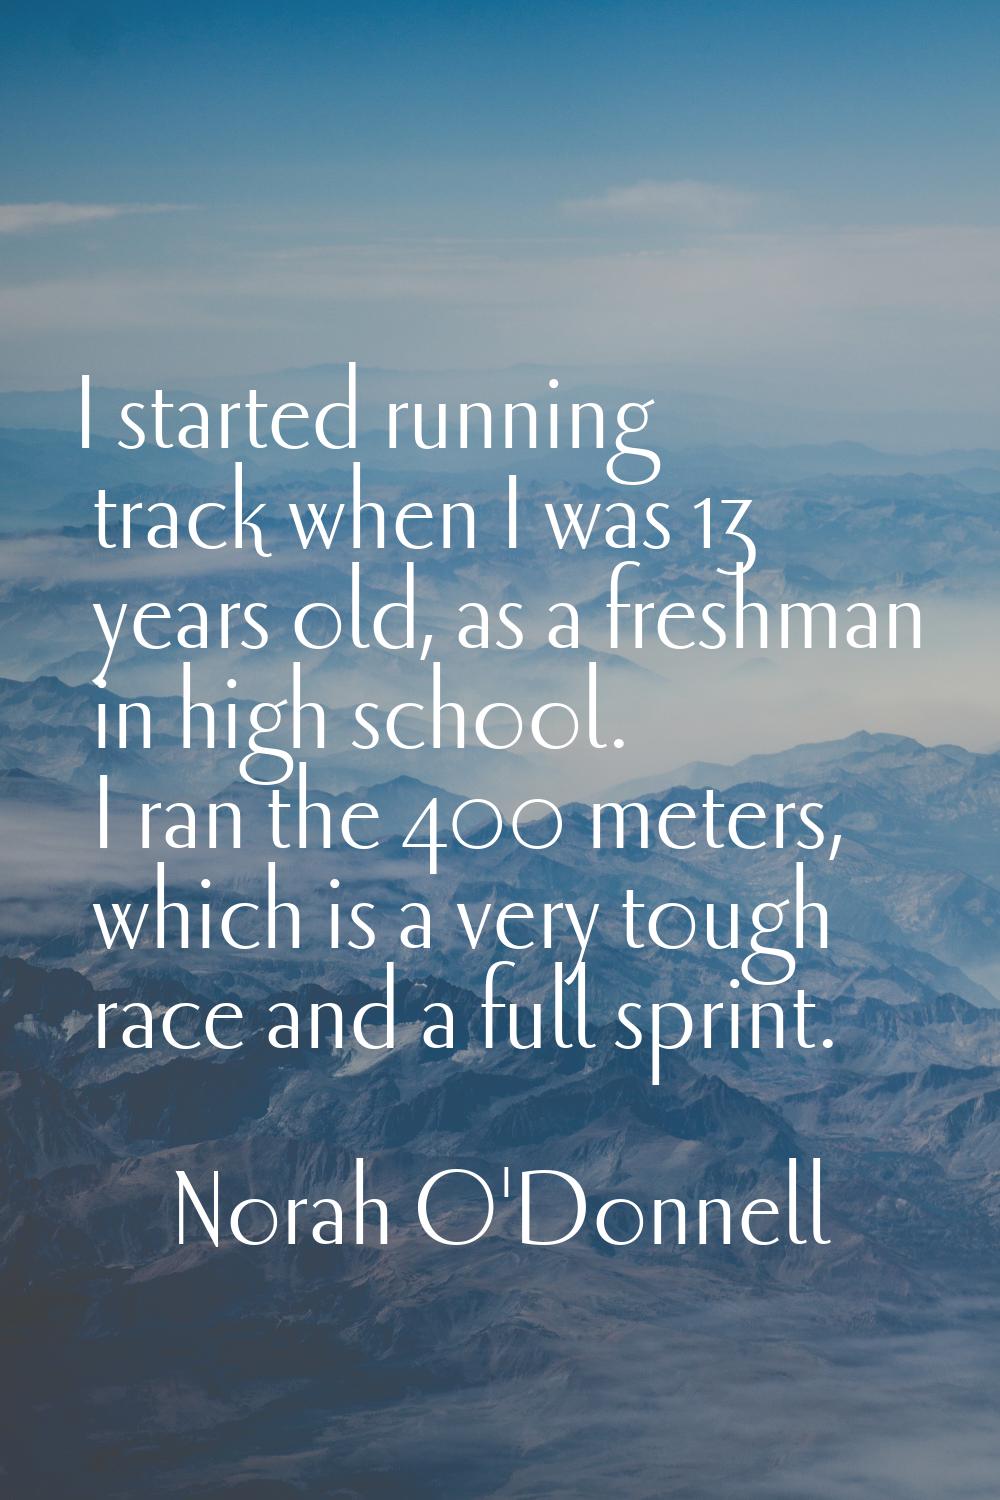 I started running track when I was 13 years old, as a freshman in high school. I ran the 400 meters